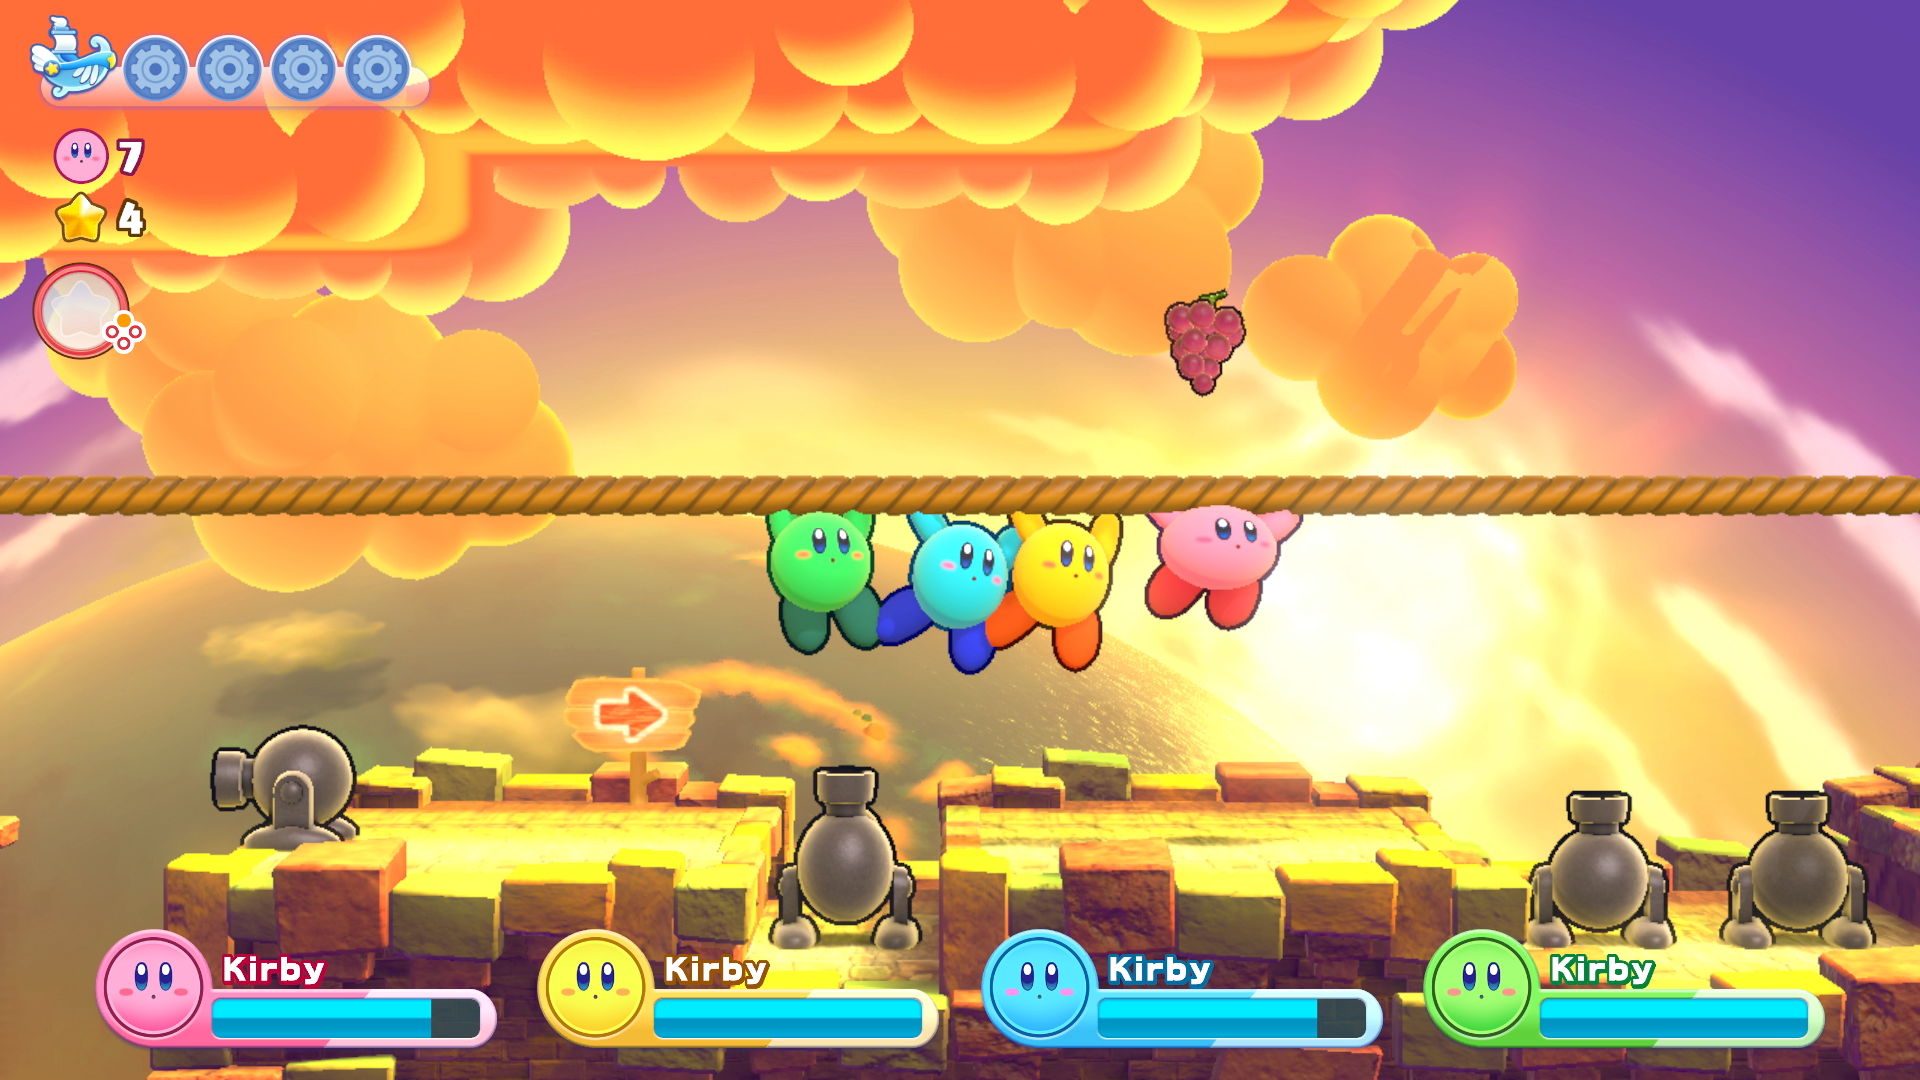 Kirby's Return to Dream Land Deluxe is a remake of the Wii coop game -  Polygon